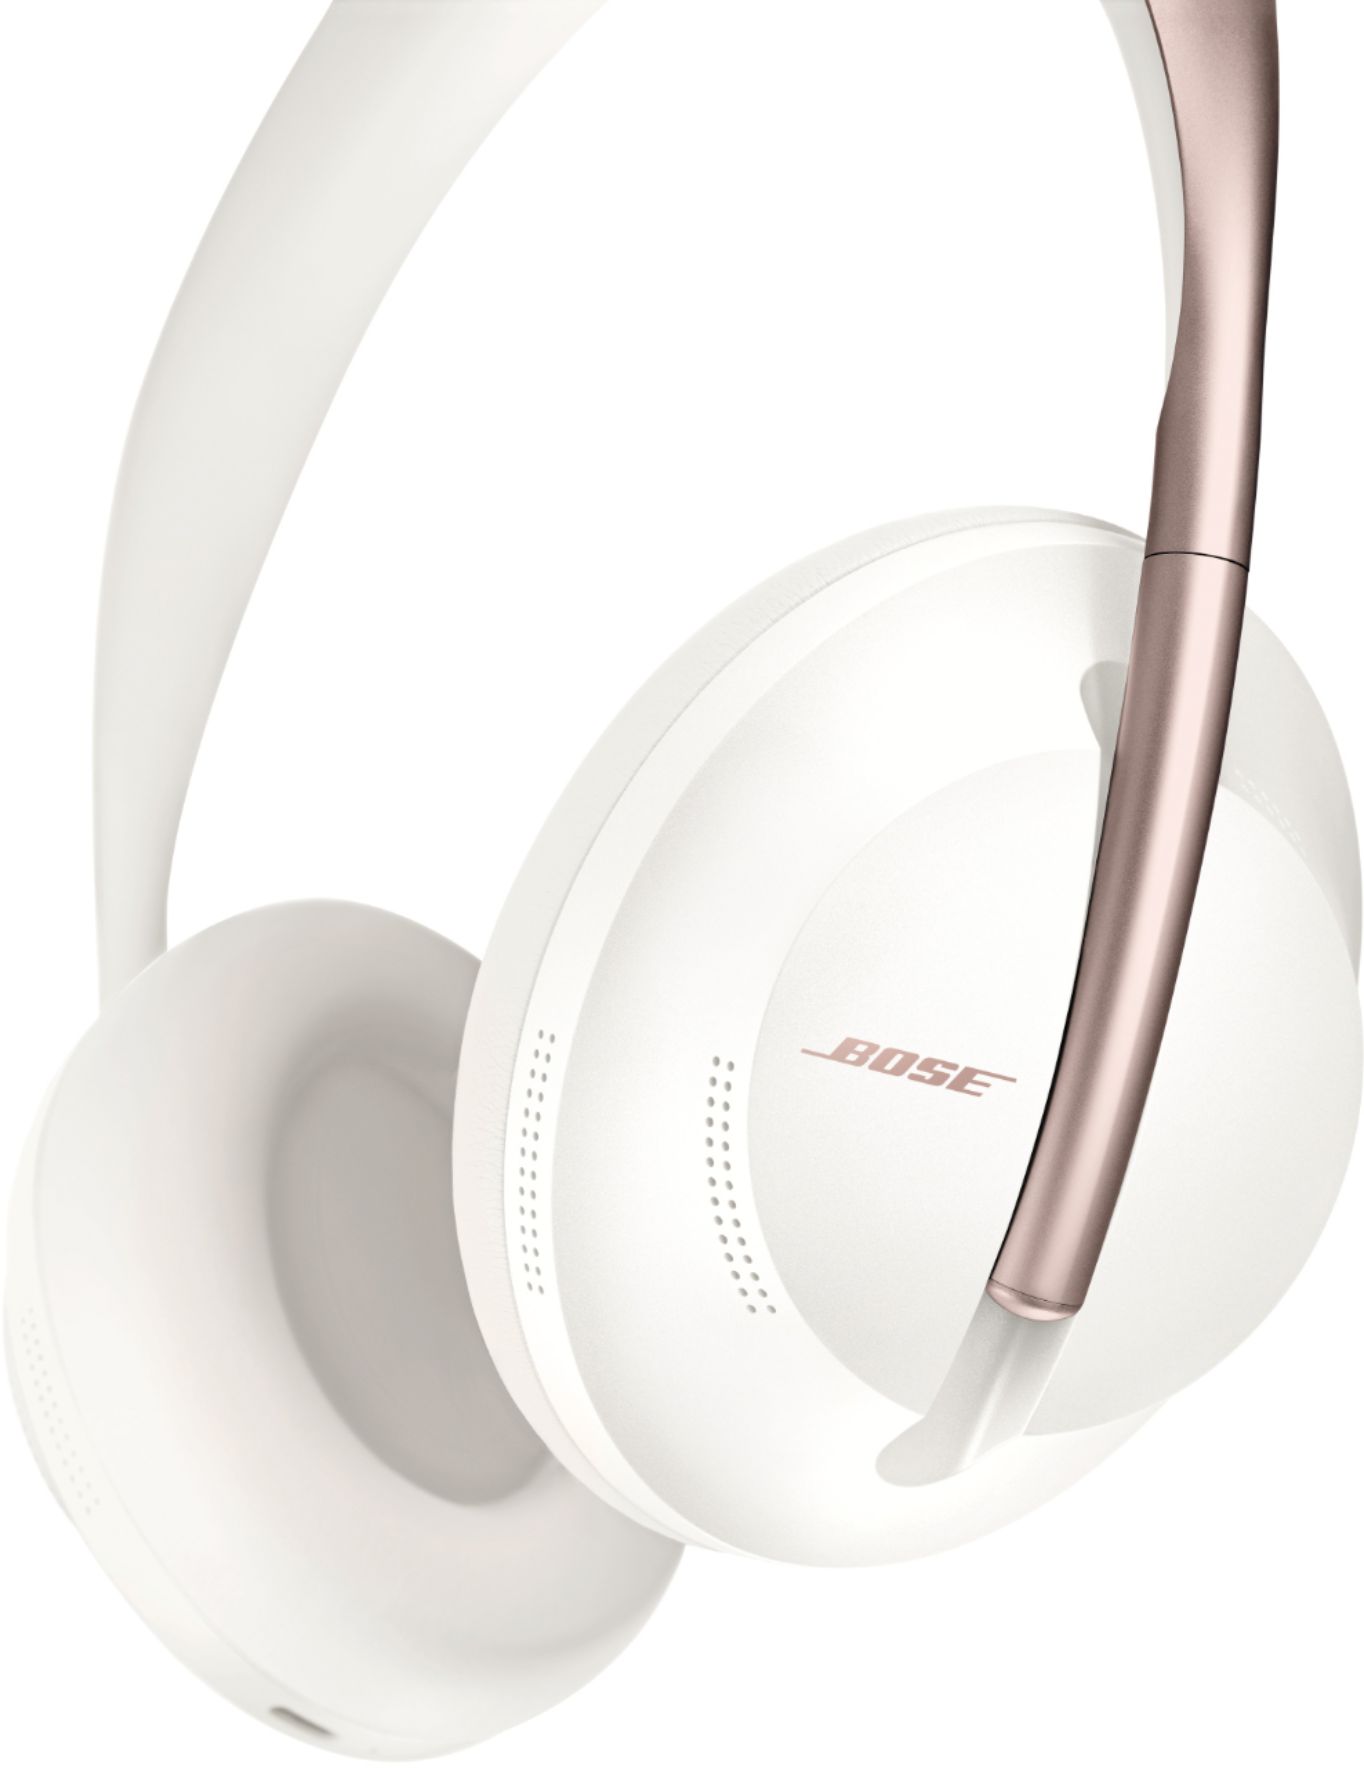 Best Buy: Headphones 700 Wireless Noise Cancelling Over-the-Ear